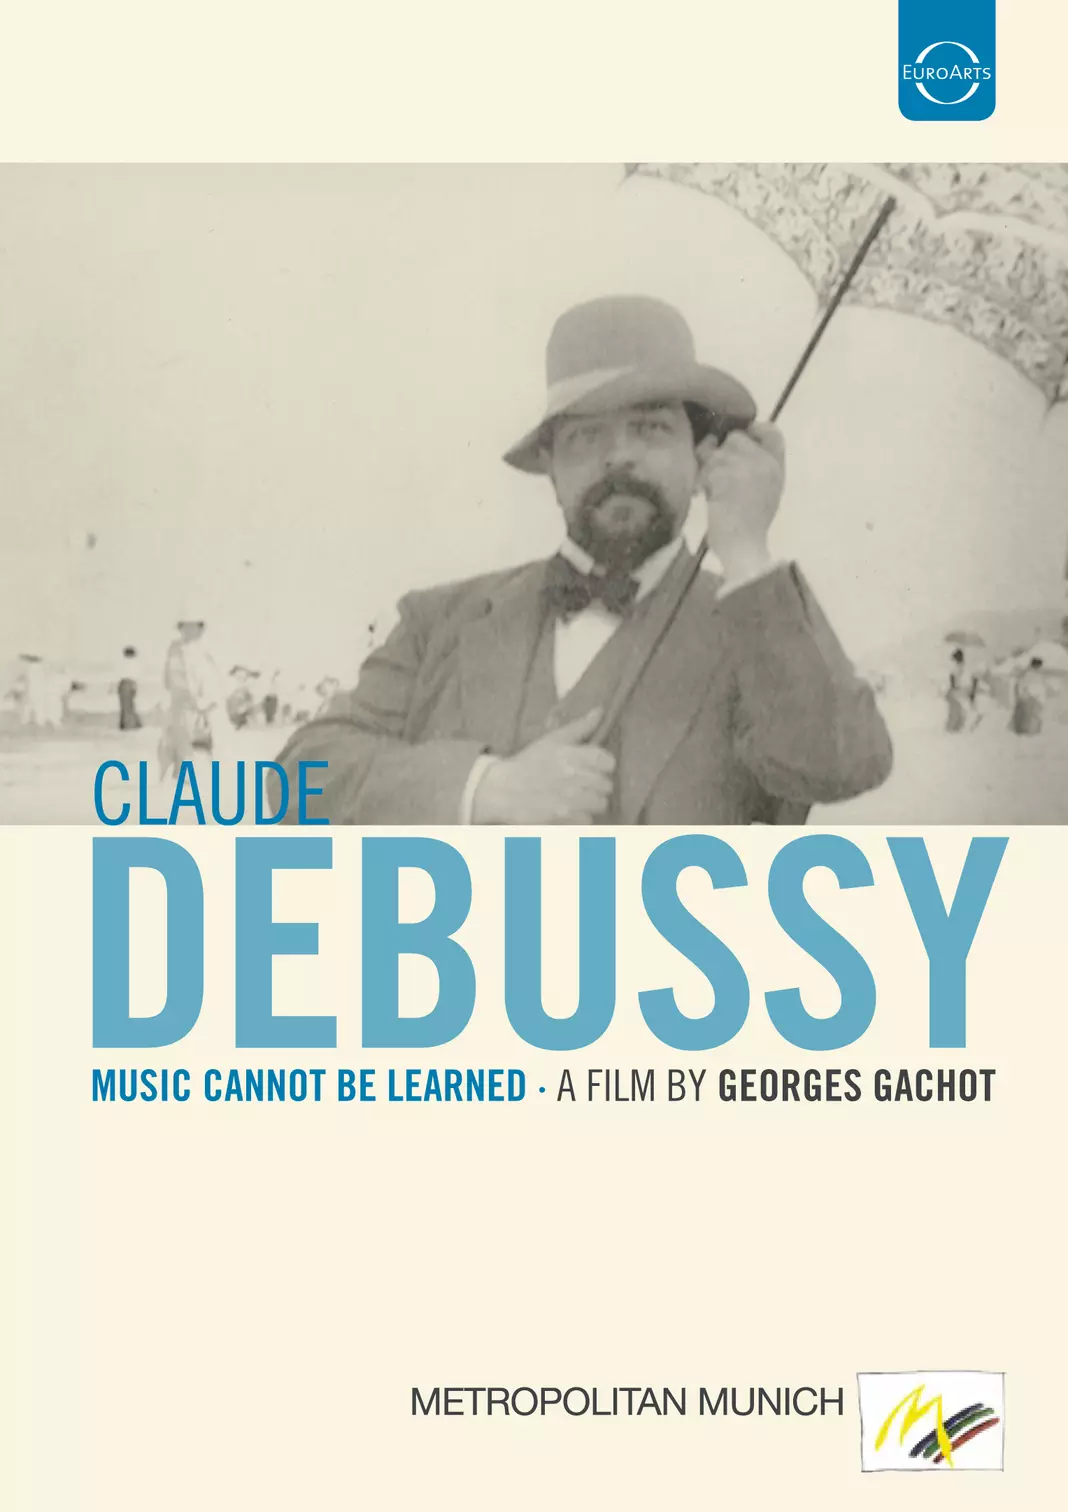 Claude Debussy - Music cannot be learned